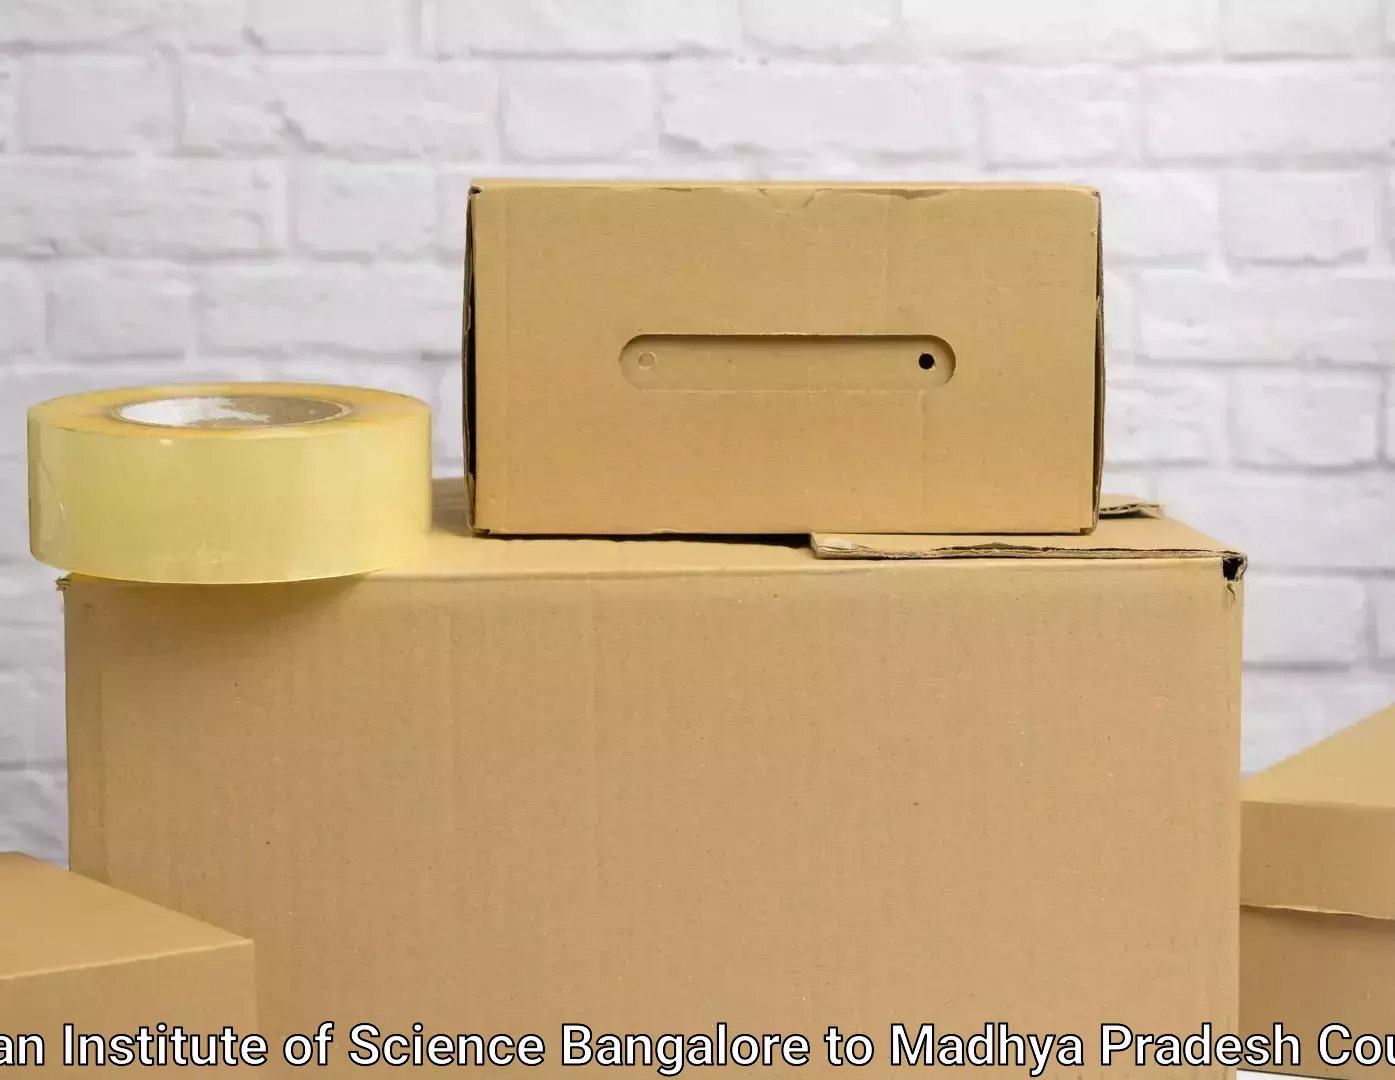 Professional relocation services Indian Institute of Science Bangalore to Madhya Pradesh